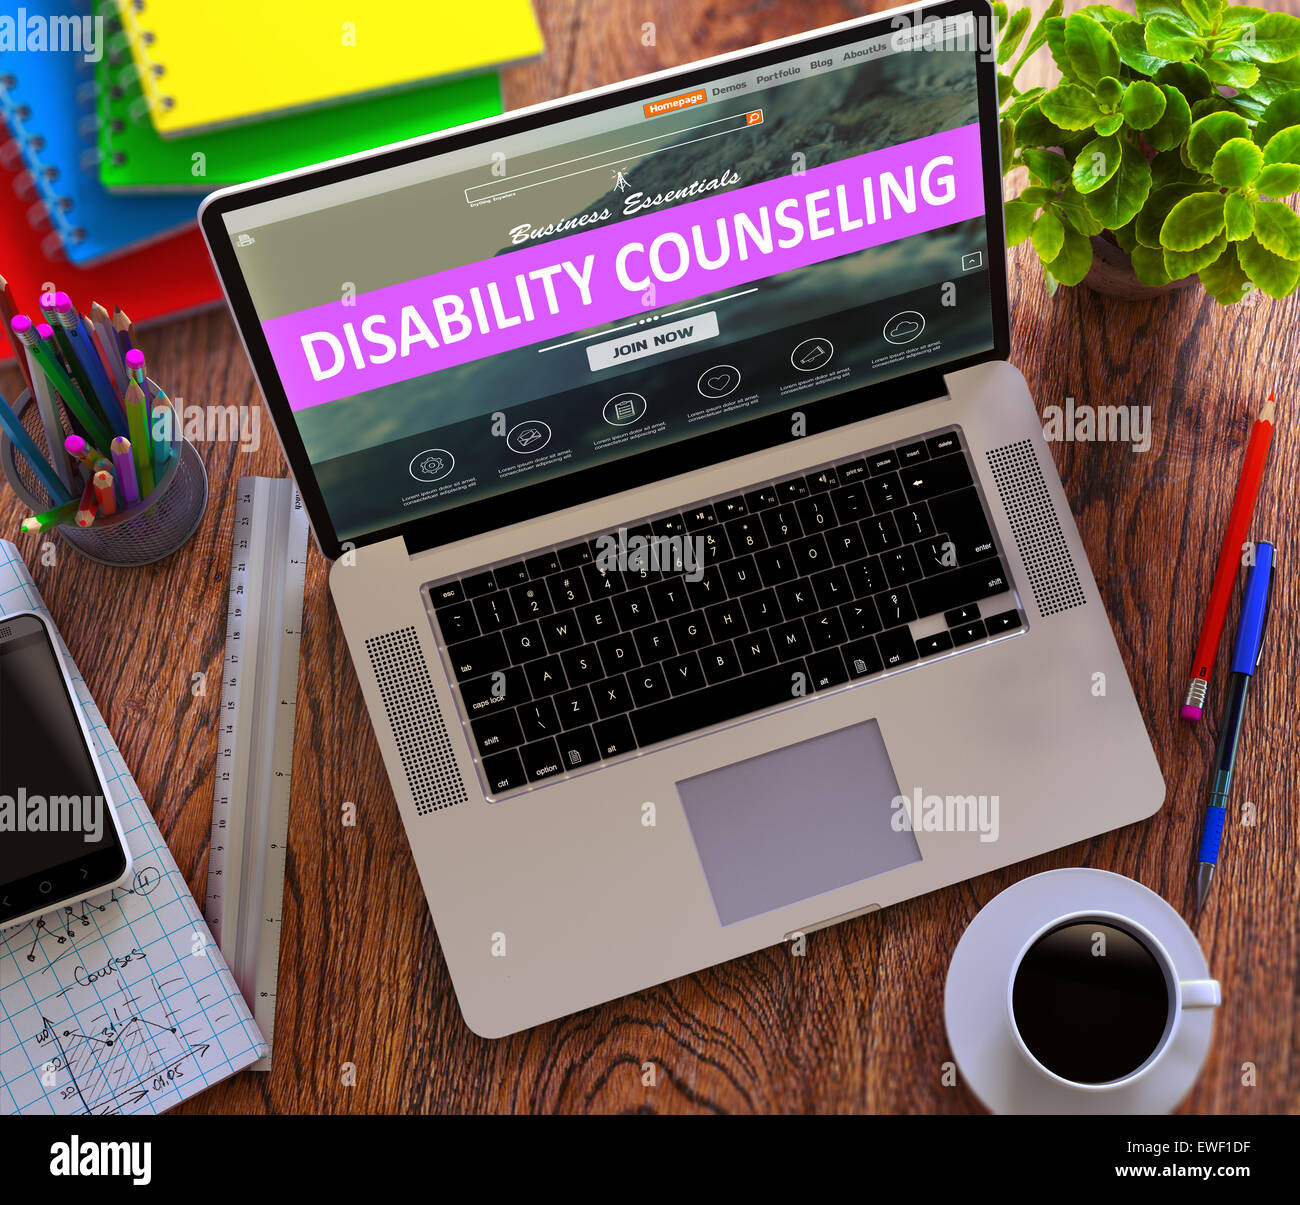 Disability Counseling Concept on Modern Laptop Screen. Stock Photo